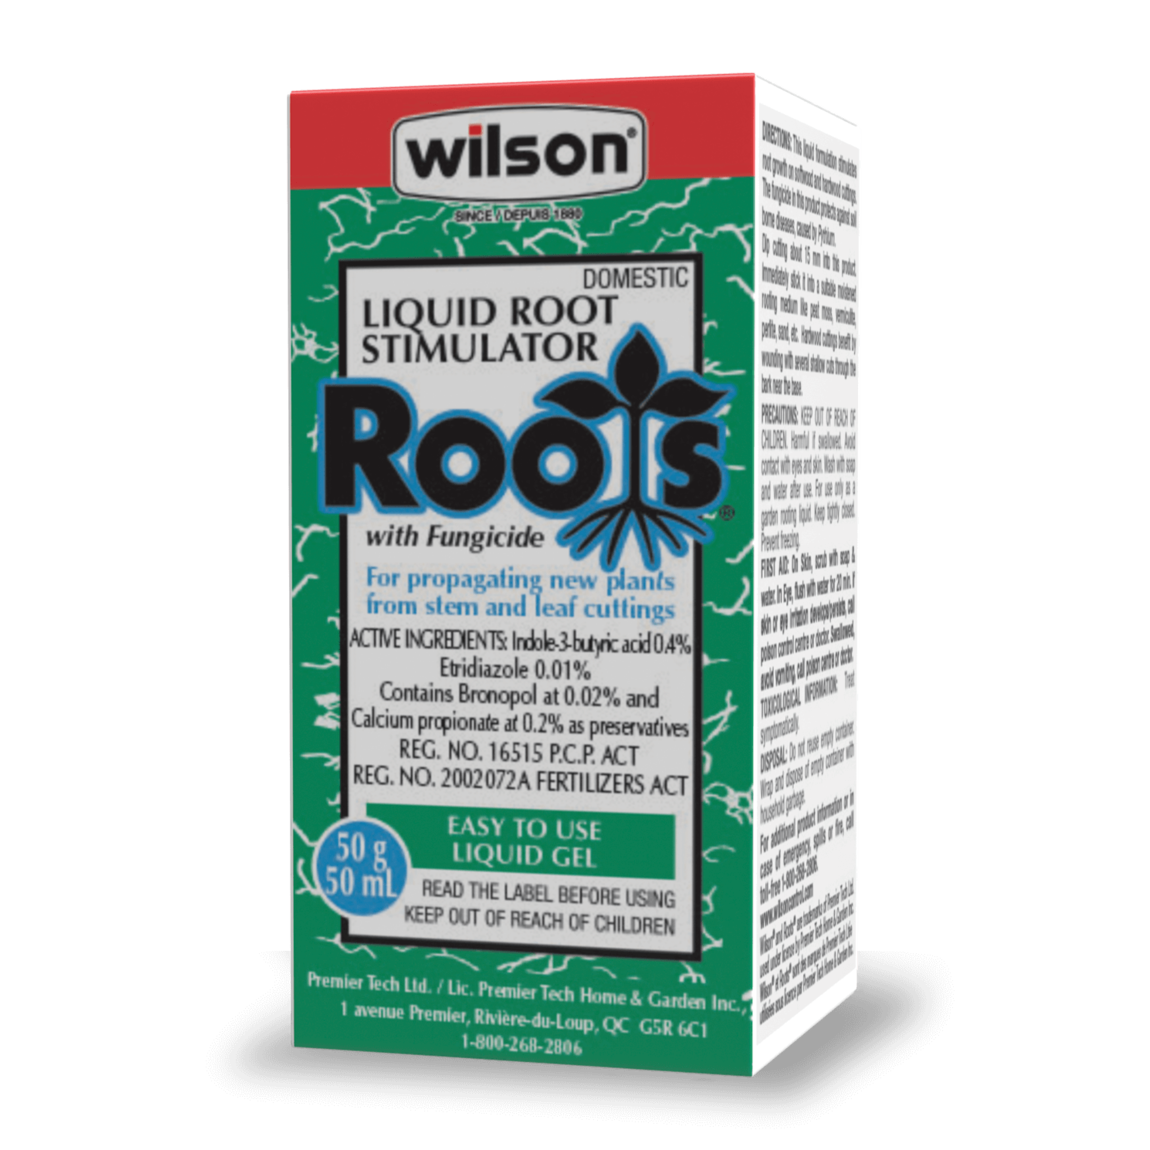 Liquid Root Stmulator helps plant cuttings roots grow